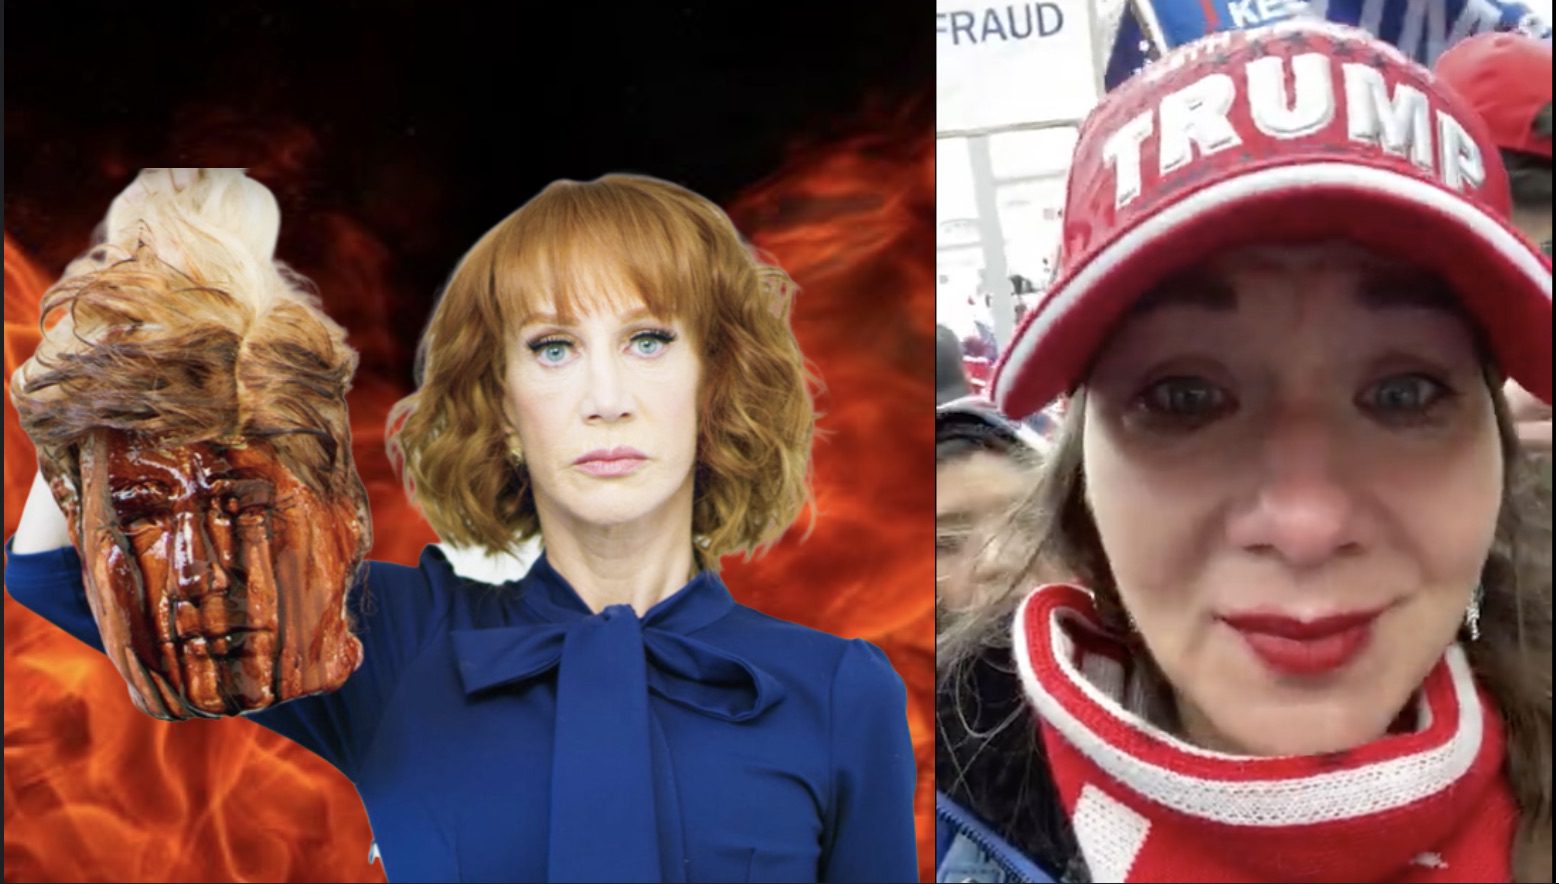 Trump Supporter Fears Her Family’s Safety After Kathy Griffin Doxxed Her Fa...